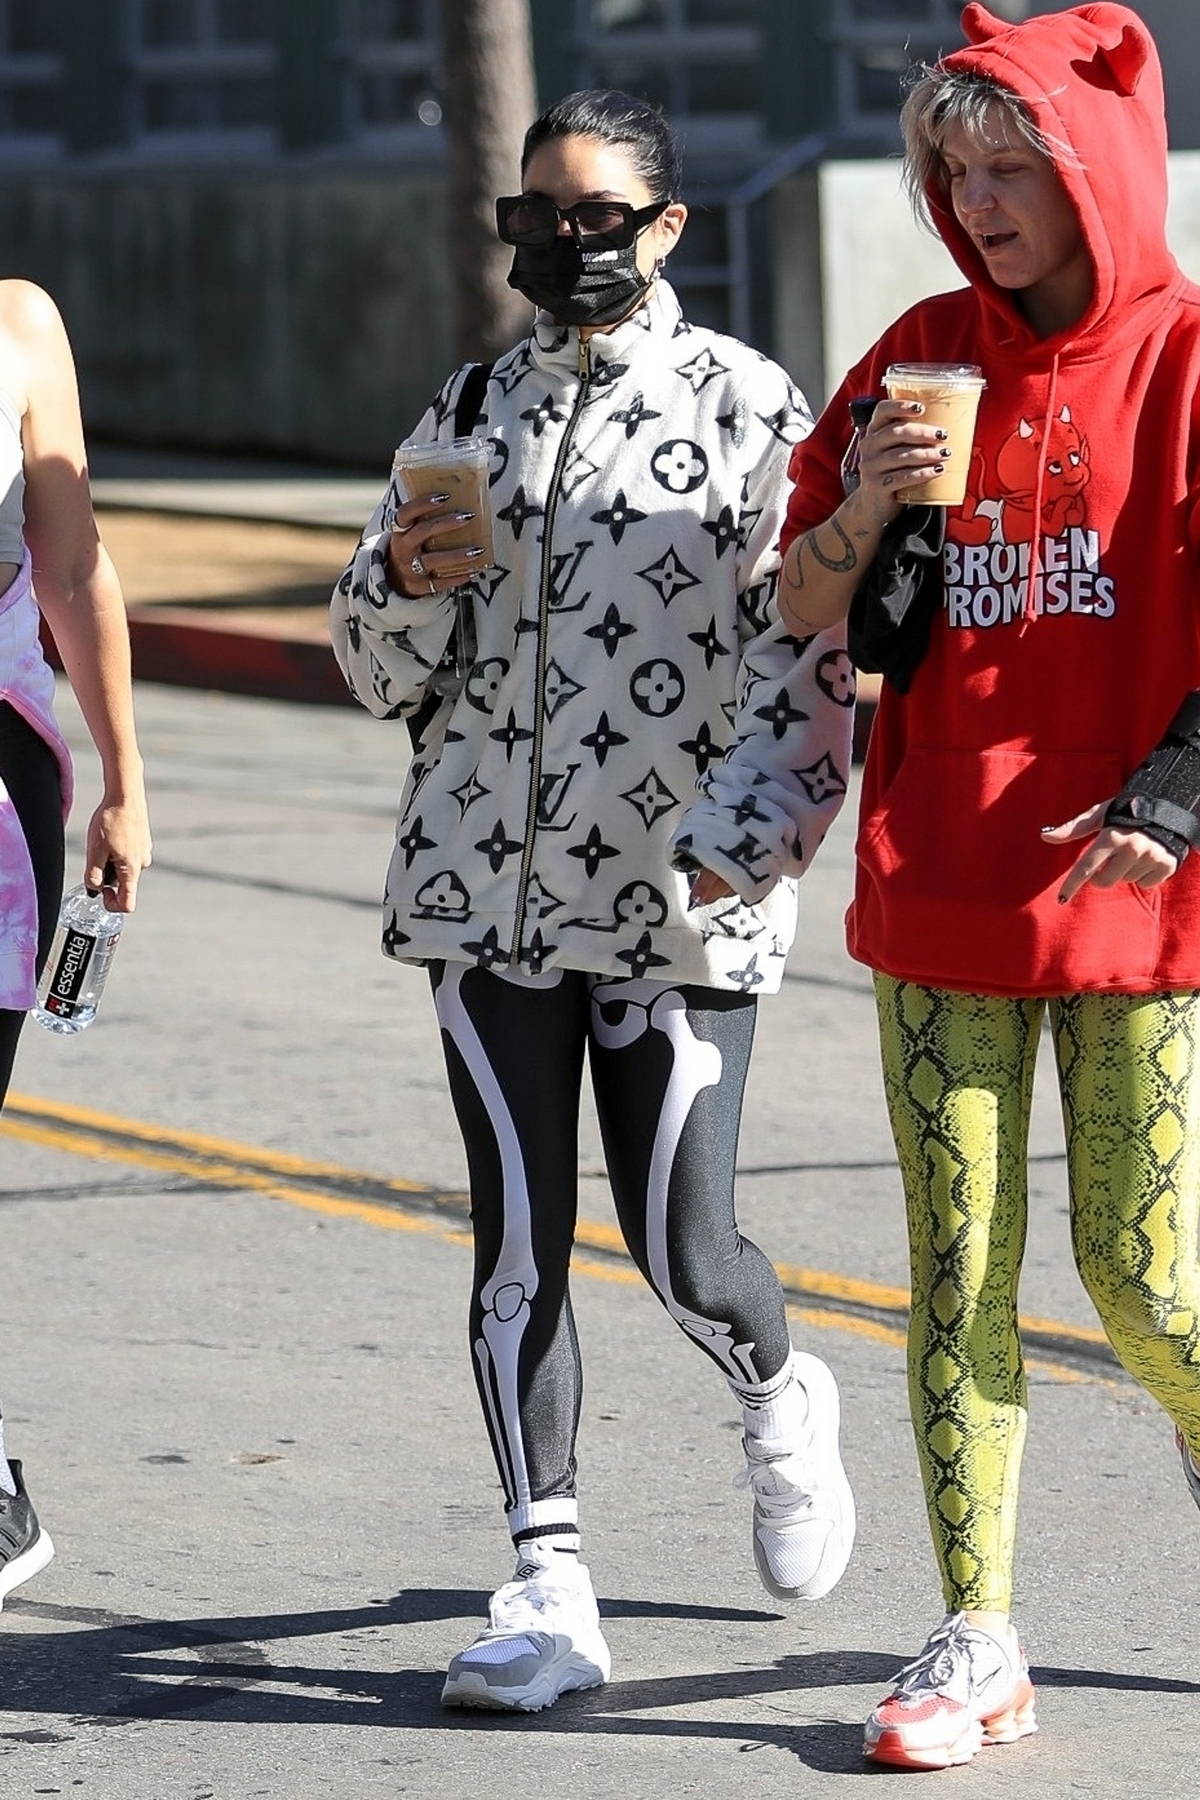 https://www.celebsfirst.com/wp-content/uploads/2021/10/vanessa-hudgens-rocks-louis-vuitton-jacket-with-leggings-as-she-grabs-a-coffee-with-friends-in-west-hollywood-california-261021_6.jpg